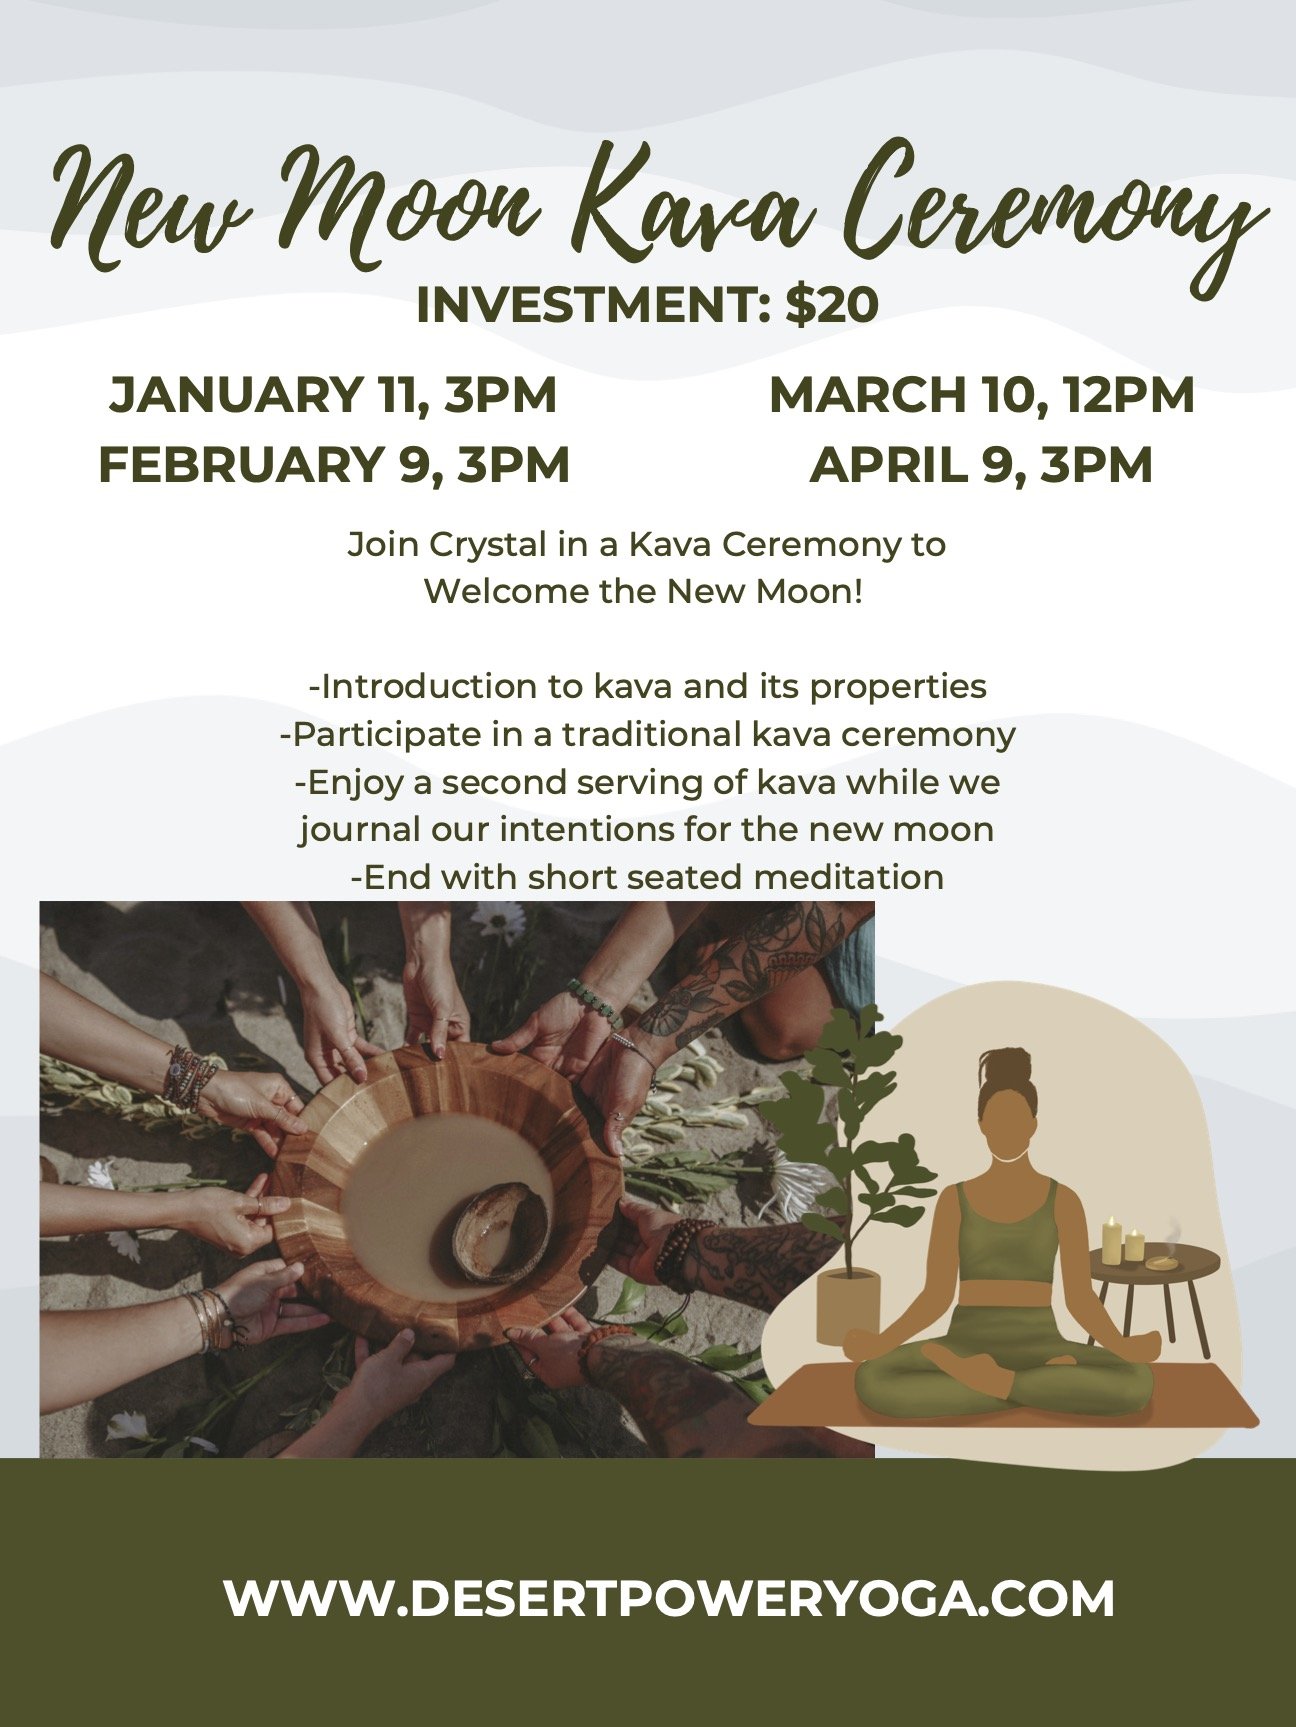 Join Crystal in a Kava Ceremony to Welcome the New Moon! -Introduction to kava and its properties -Participate in a traditional kava ceremony -Enjoy a second serving of kava while we journal our i.jpg